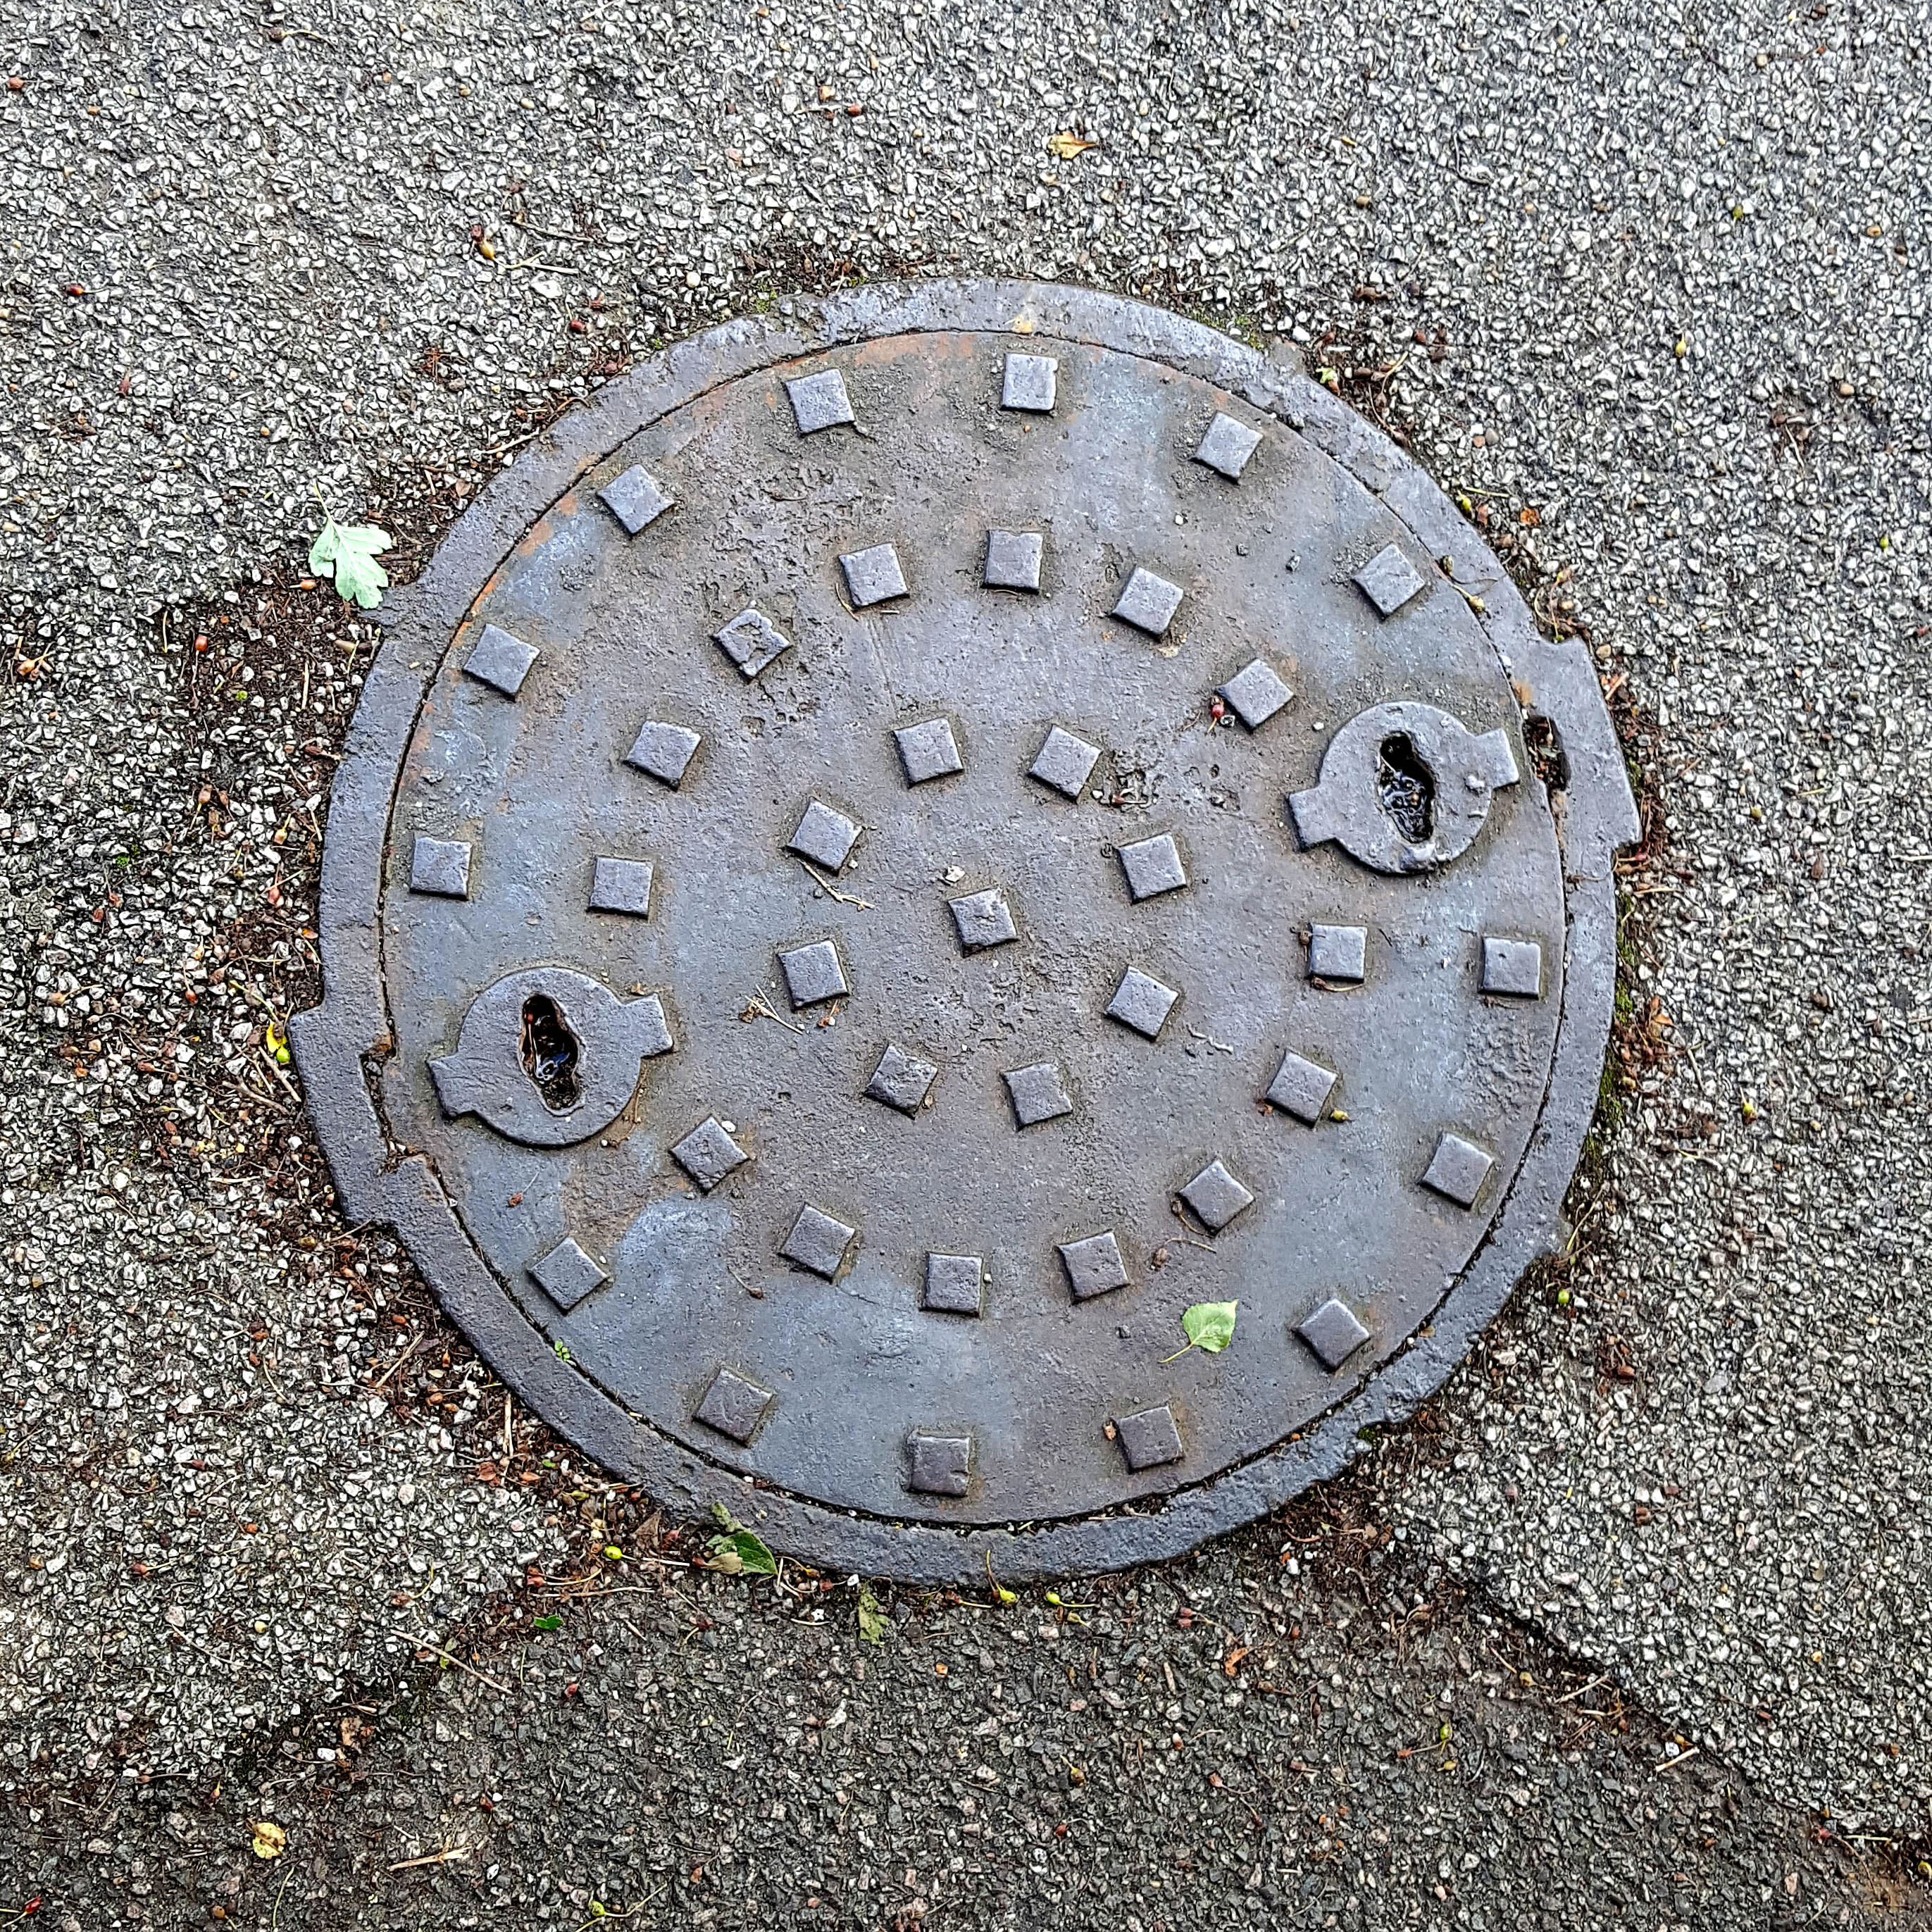 Manhole Cover, London - Cast iron with circular pattern of raised squares